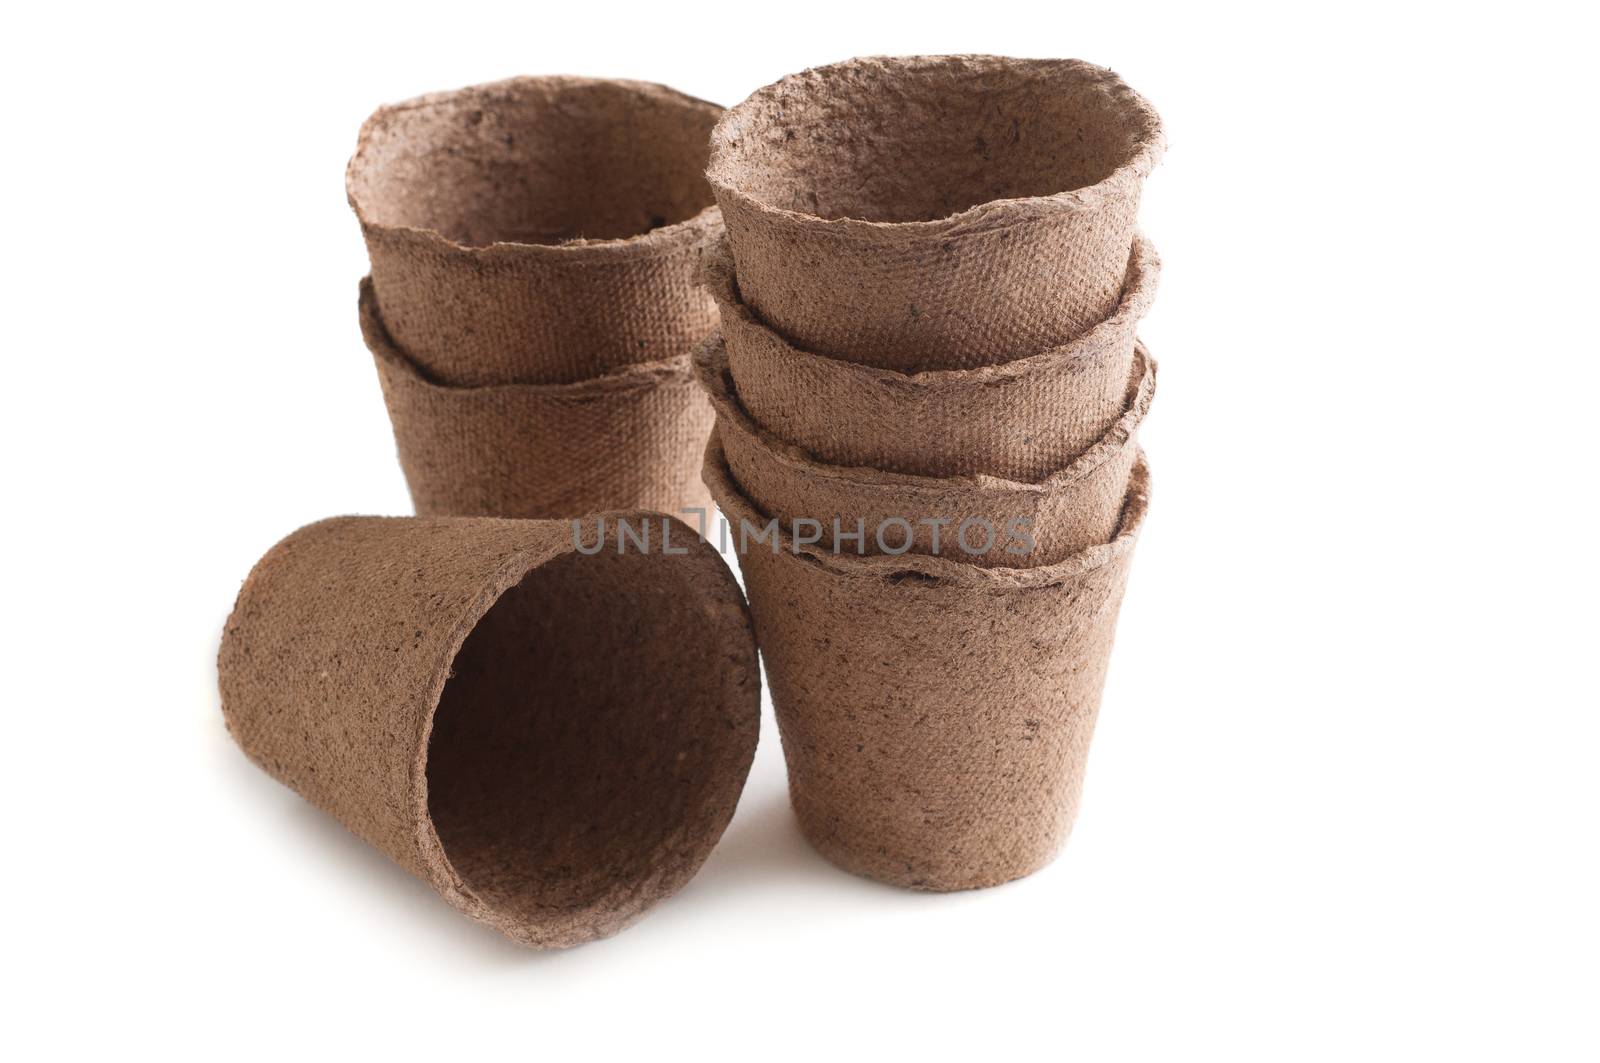 Biodegradable Peat Moss Pots  Isolated On White Background